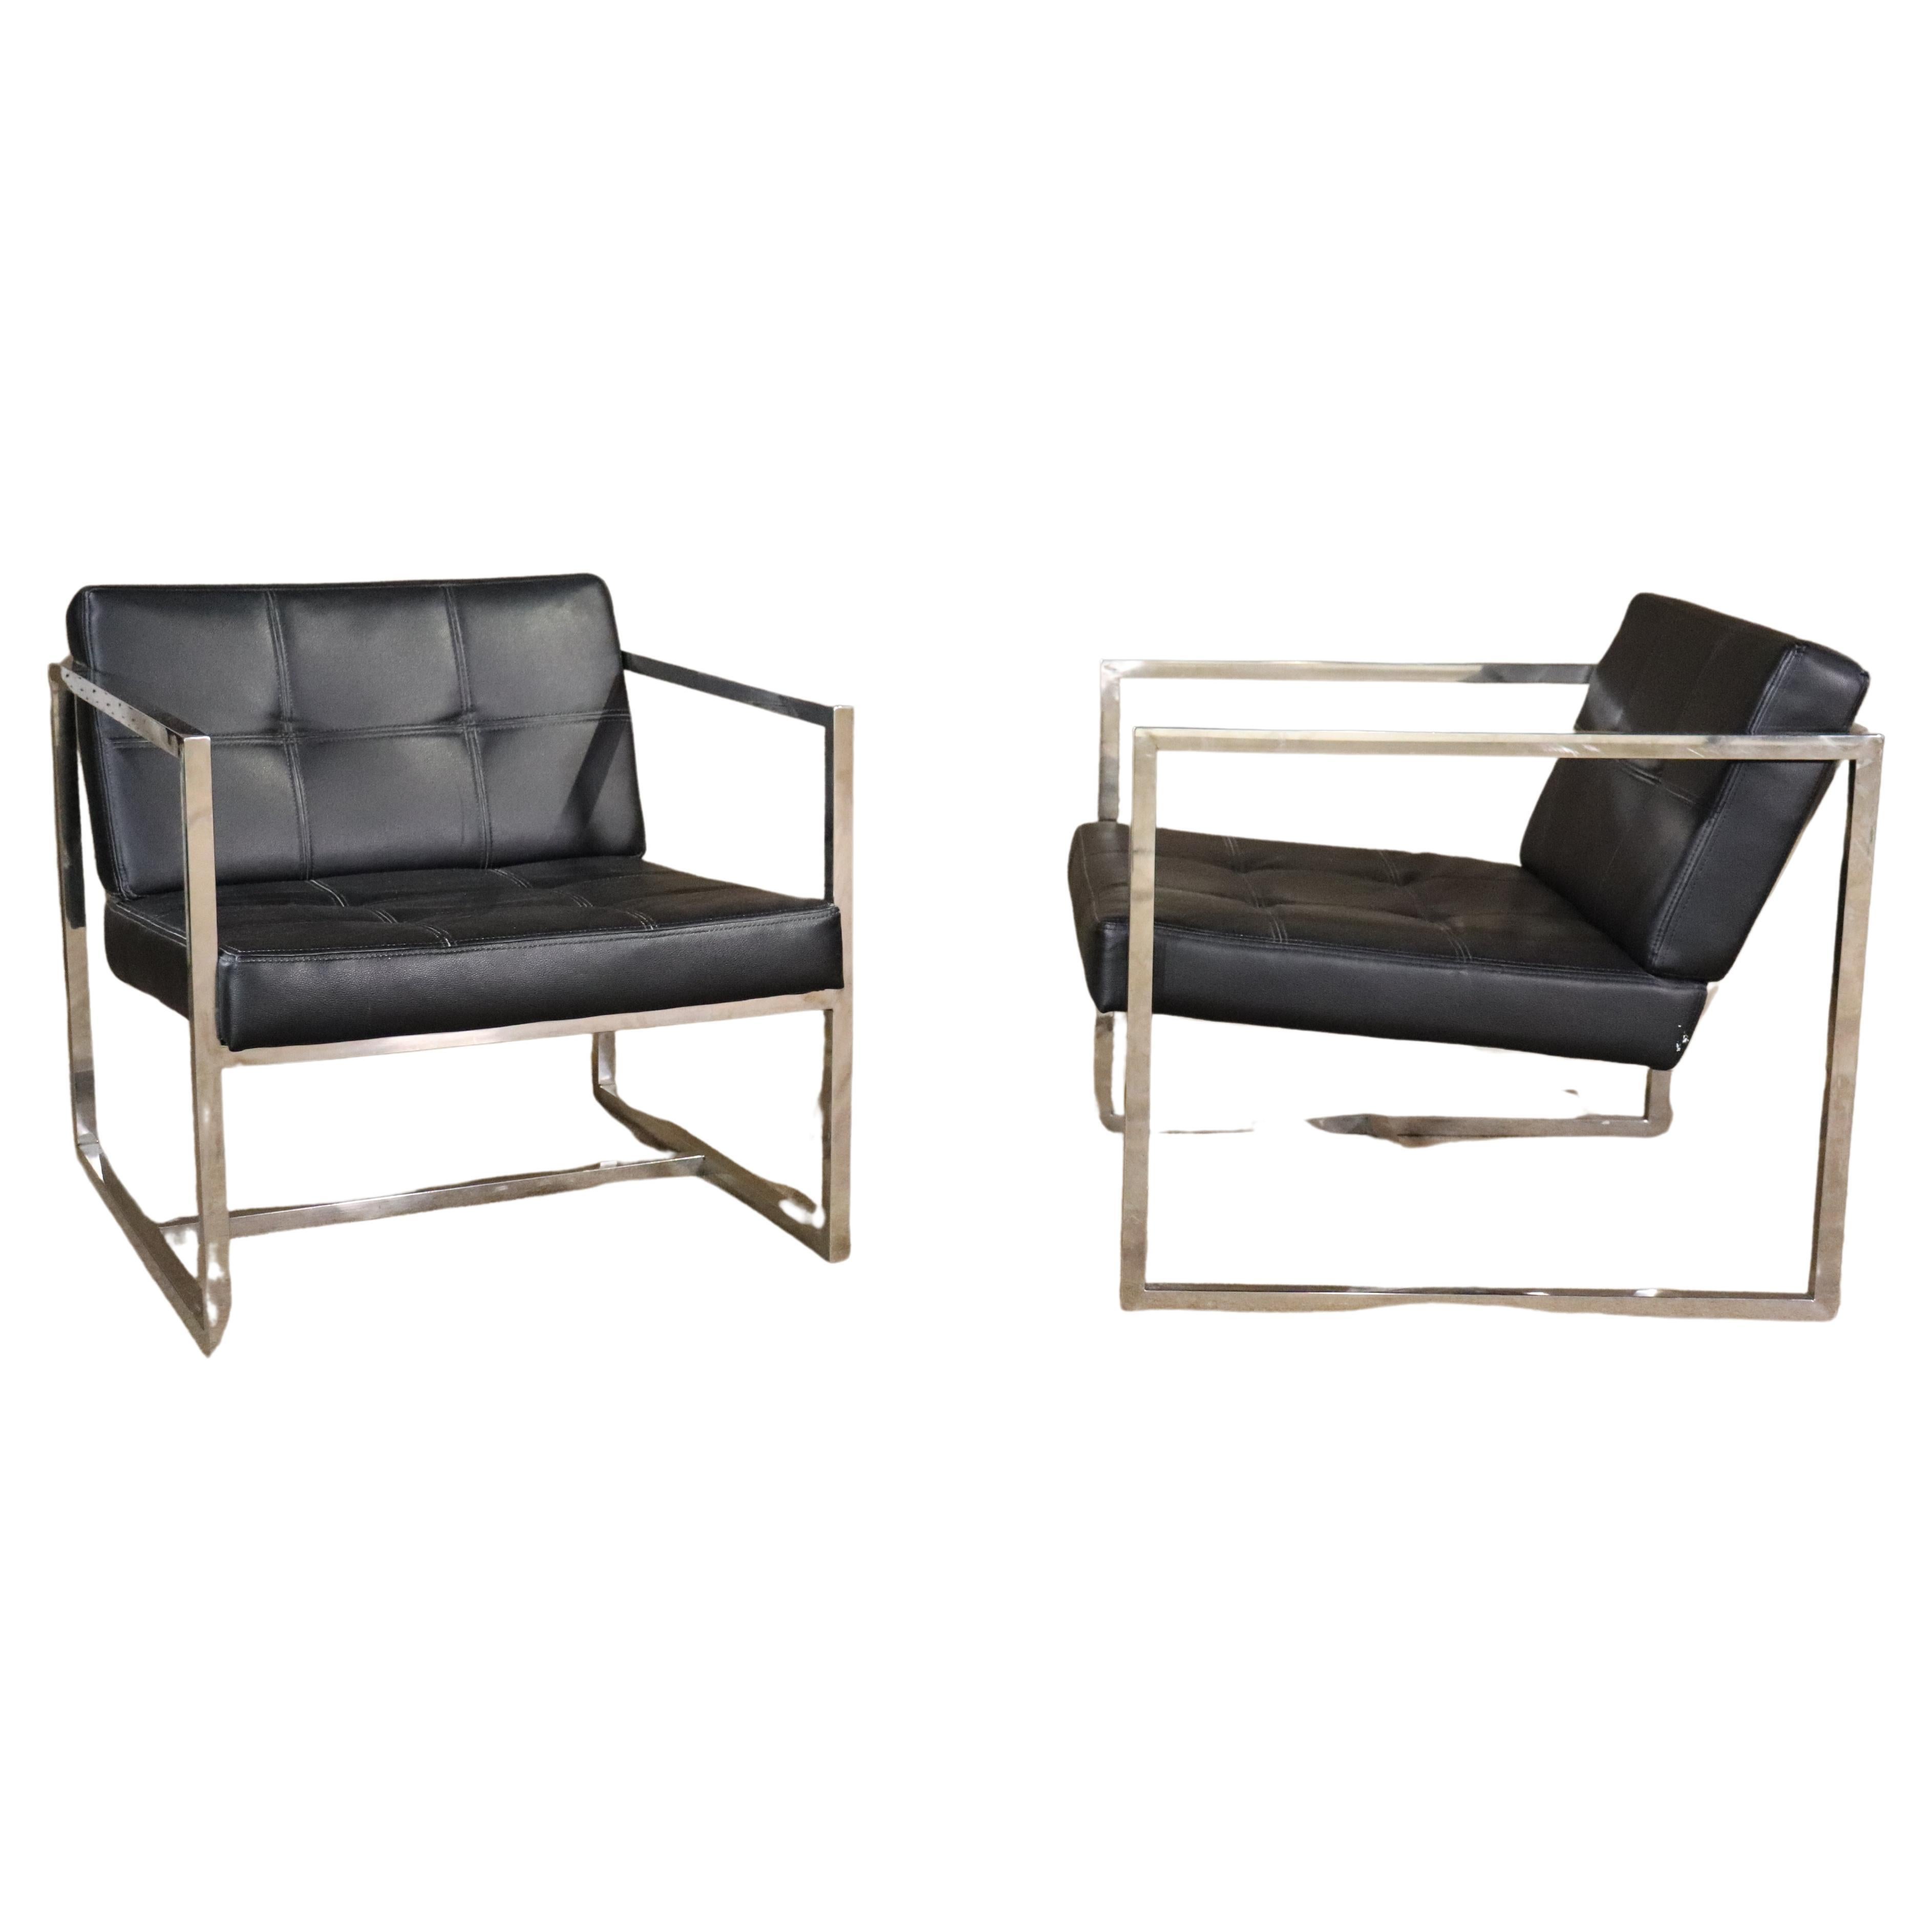 Pair of Chrome & Black Leather Lounge Chairs For Sale